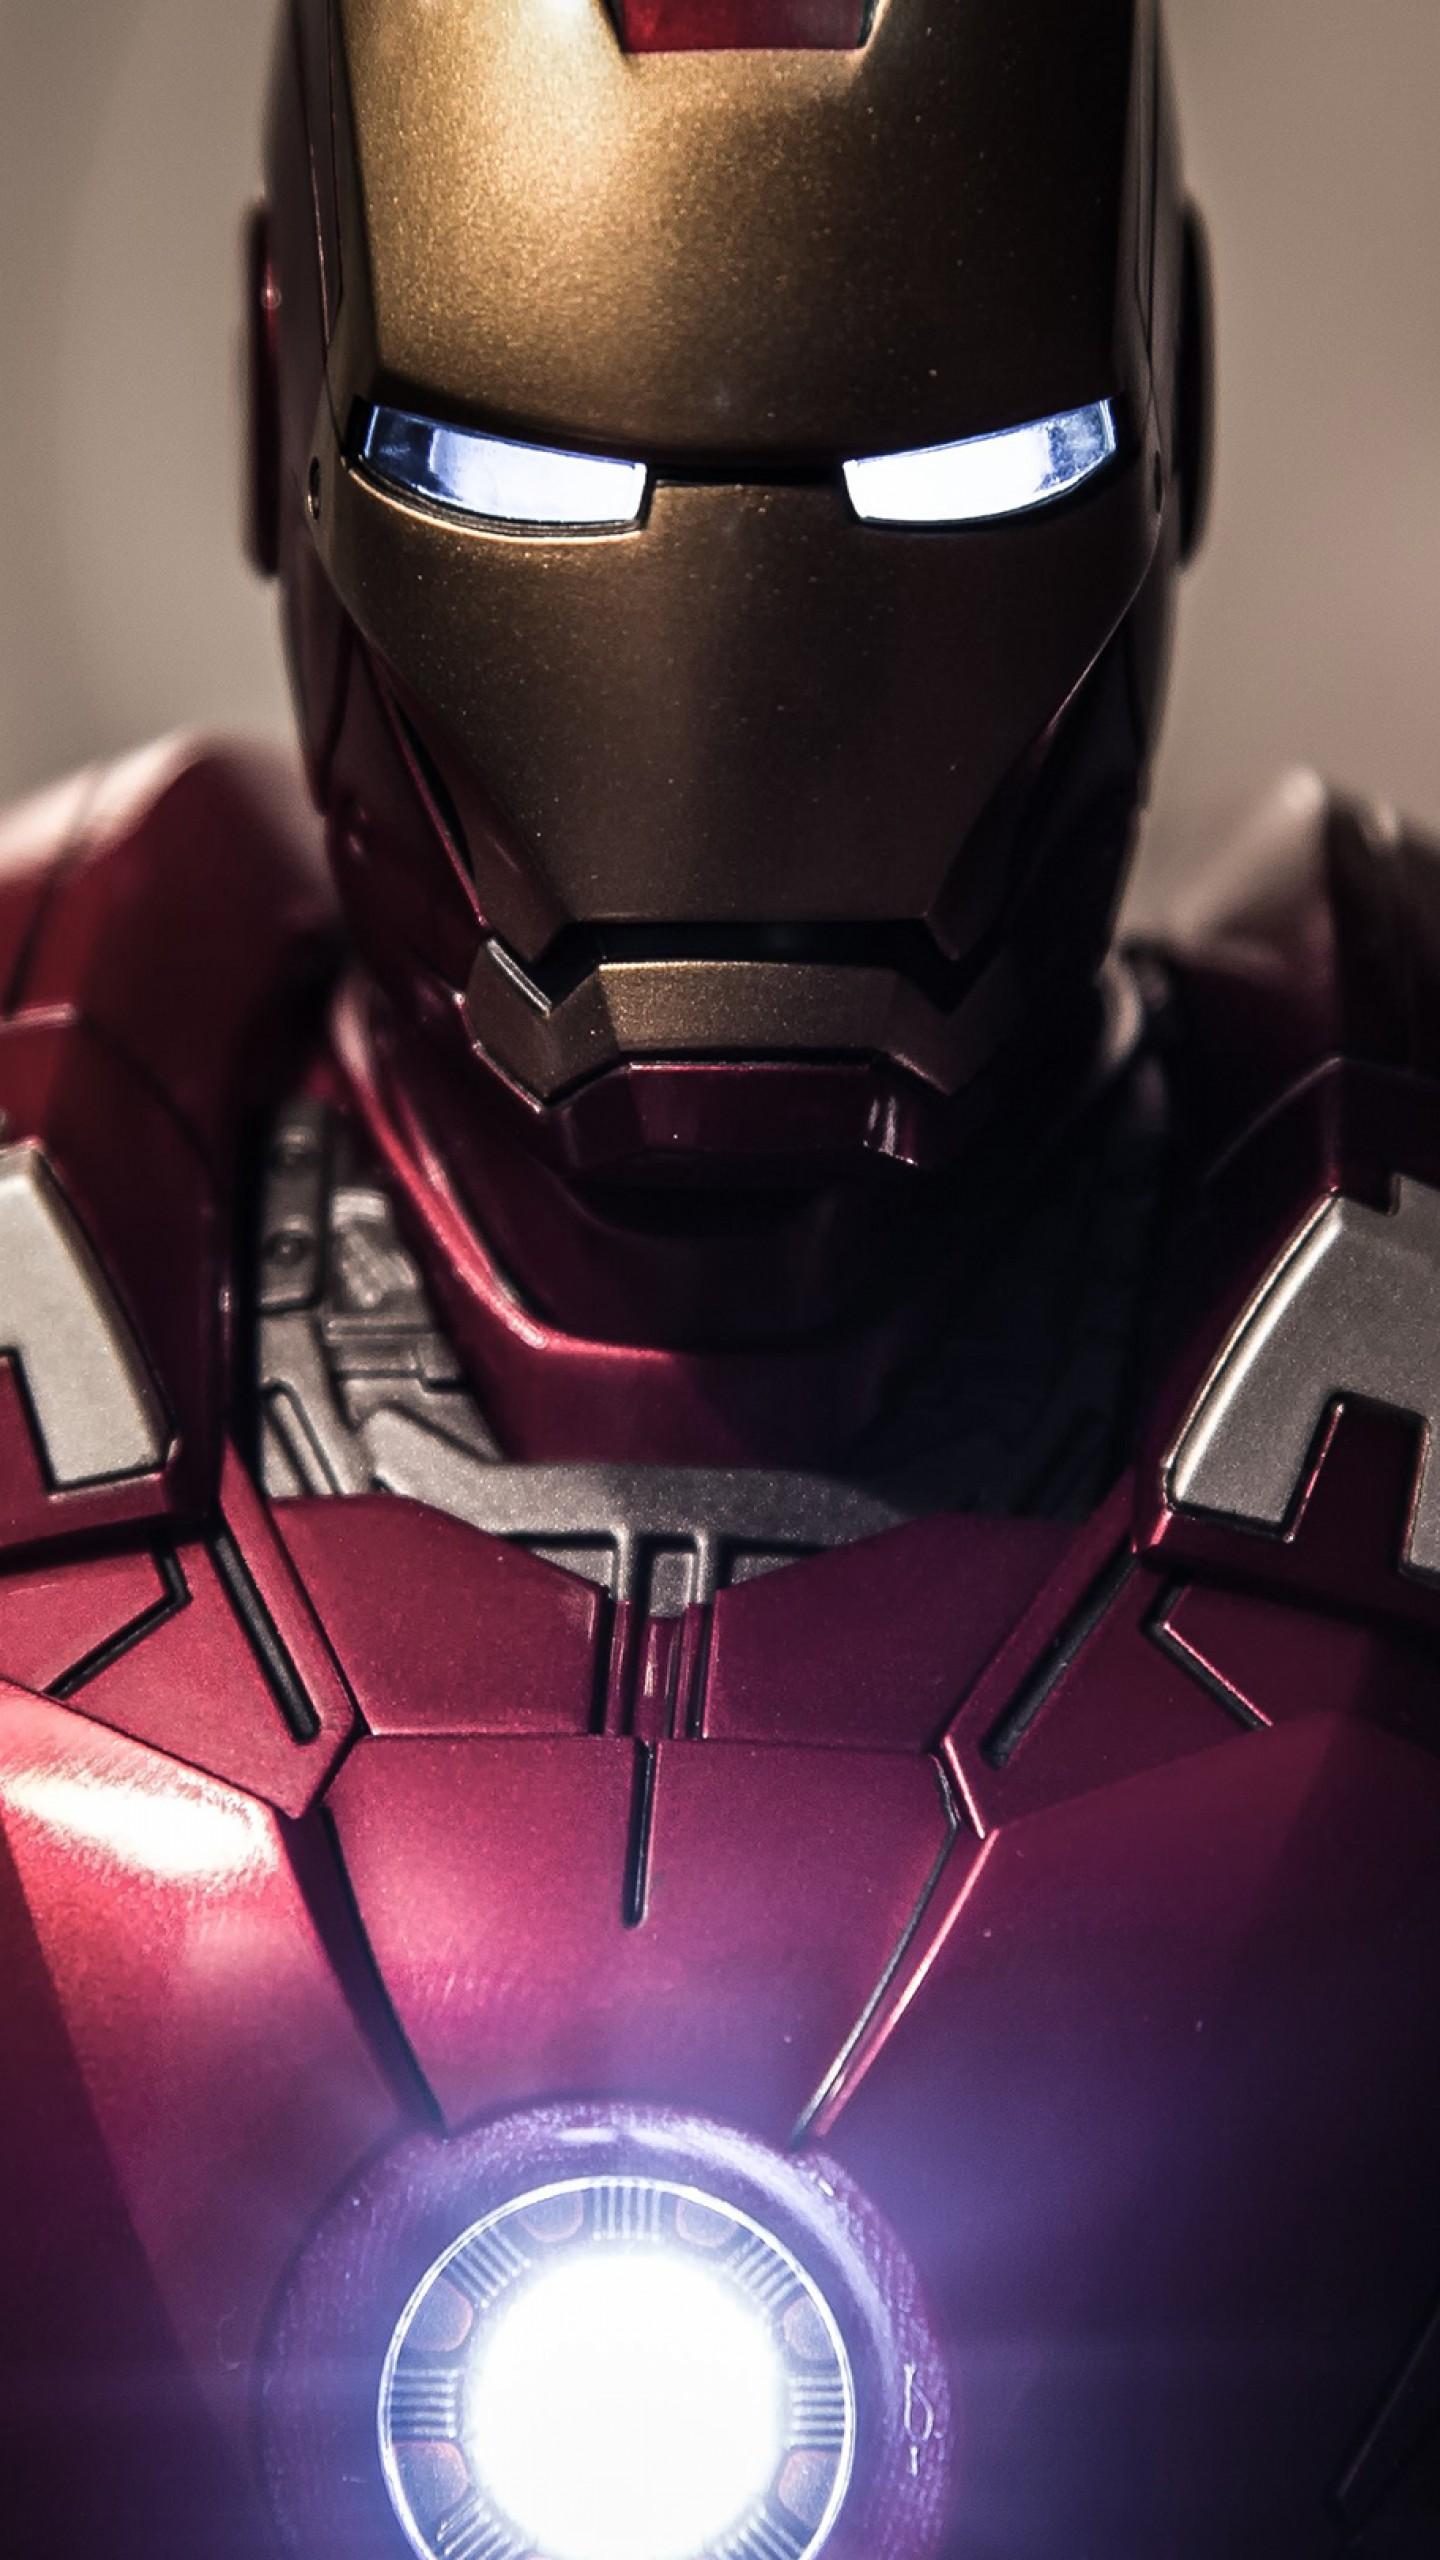 Wallpaper Iron Man, HD, Movies,. Wallpaper for iPhone, Android, Mobile and Desktop